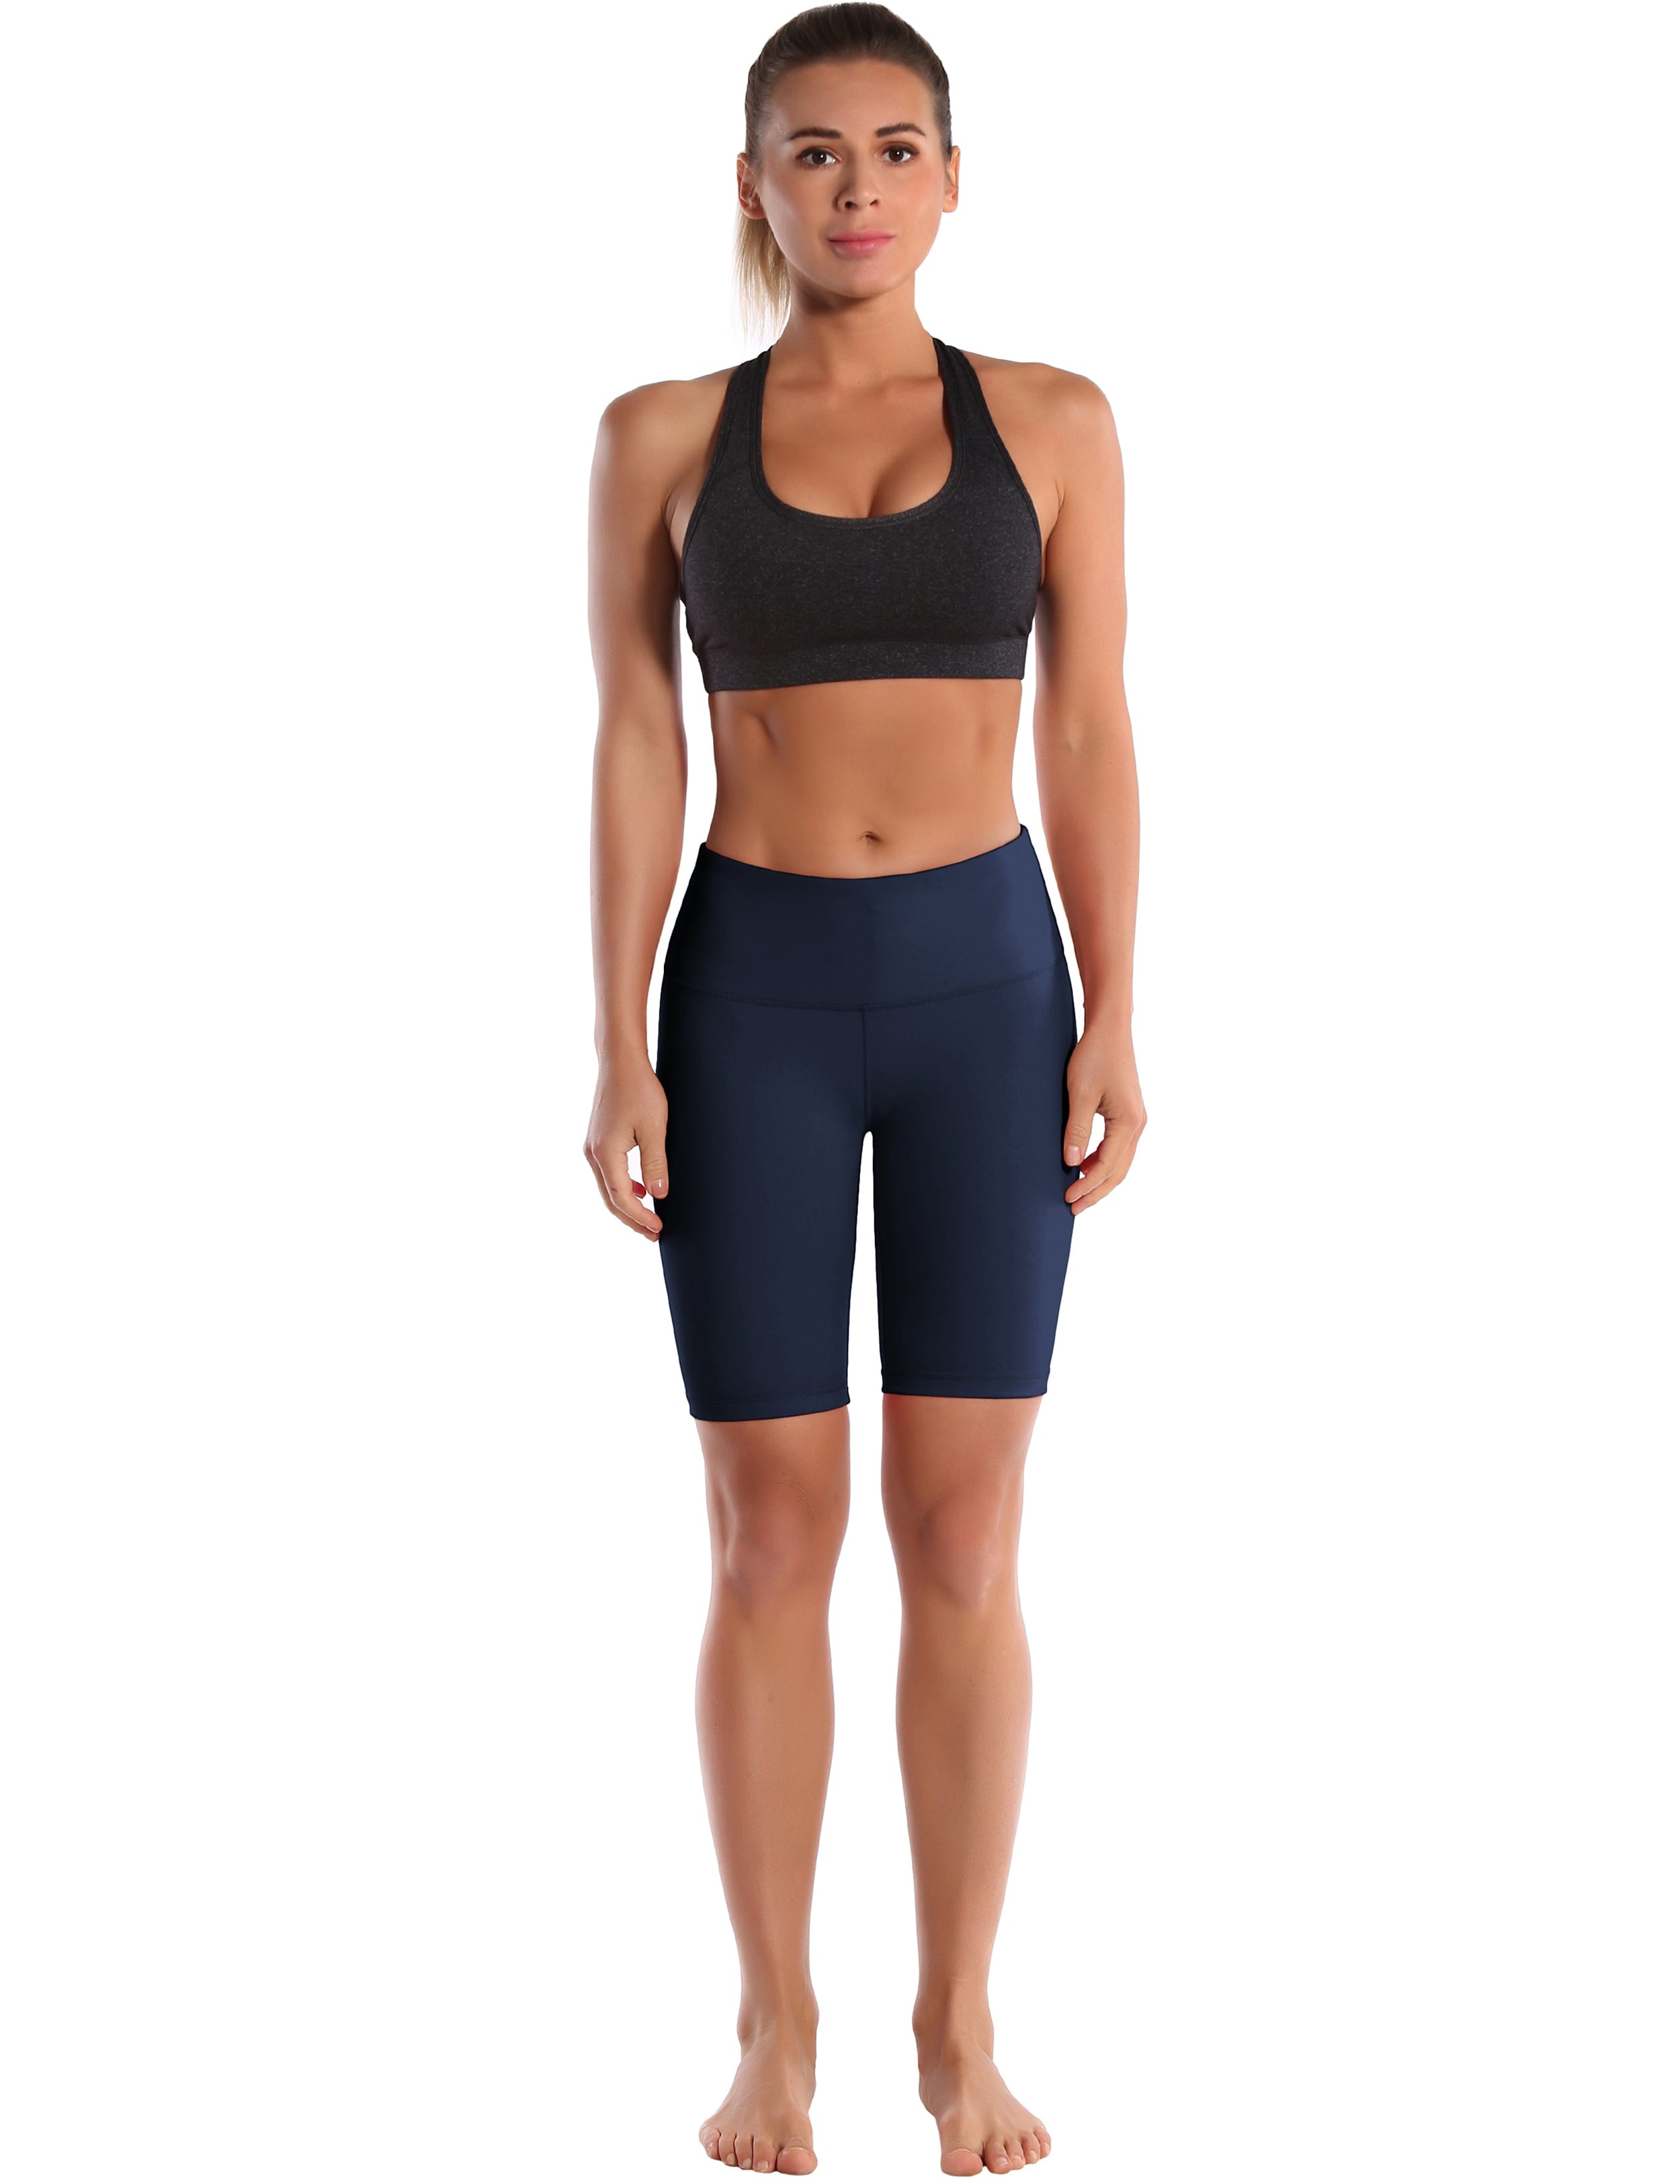 8" High Waist yogastudio Shorts darknavy Sleek, soft, smooth and totally comfortable: our newest style is here. Softest-ever fabric High elasticity High density 4-way stretch Fabric doesn't attract lint easily No see-through Moisture-wicking Machine wash 75% Nylon, 25% Spandex